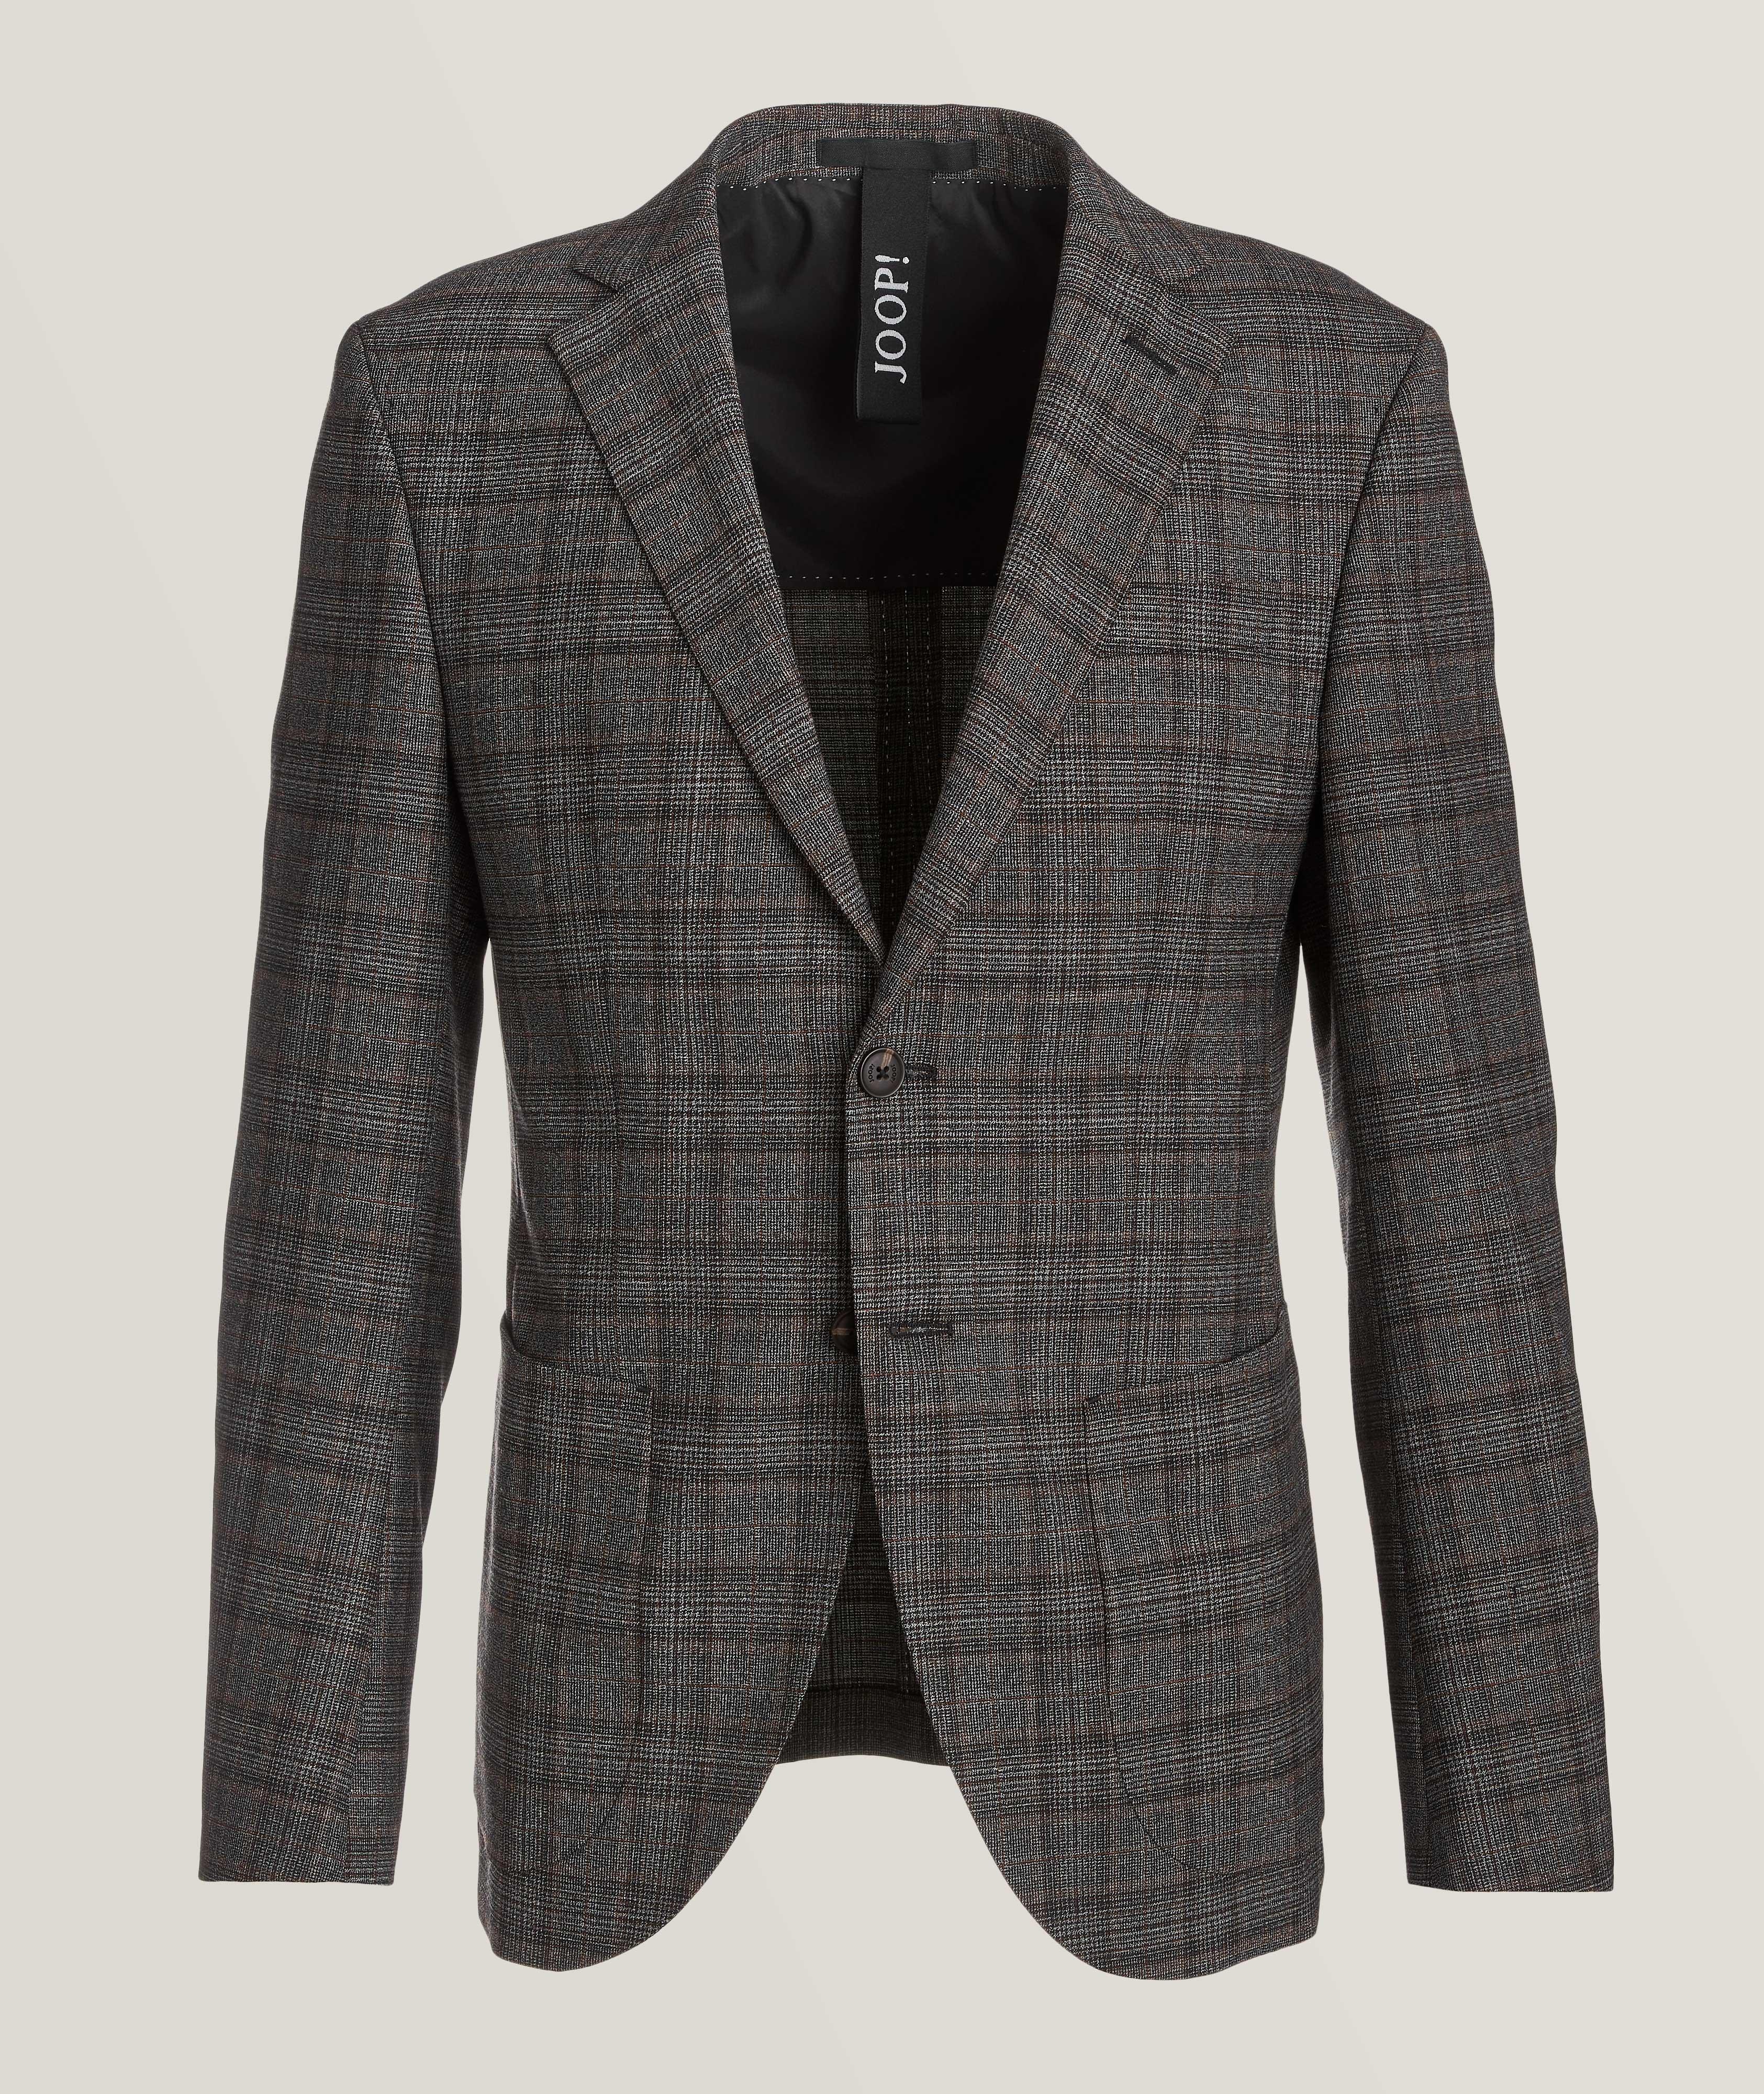 Slim-Fit Checked Stretch-Wool Sport Jacket image 0